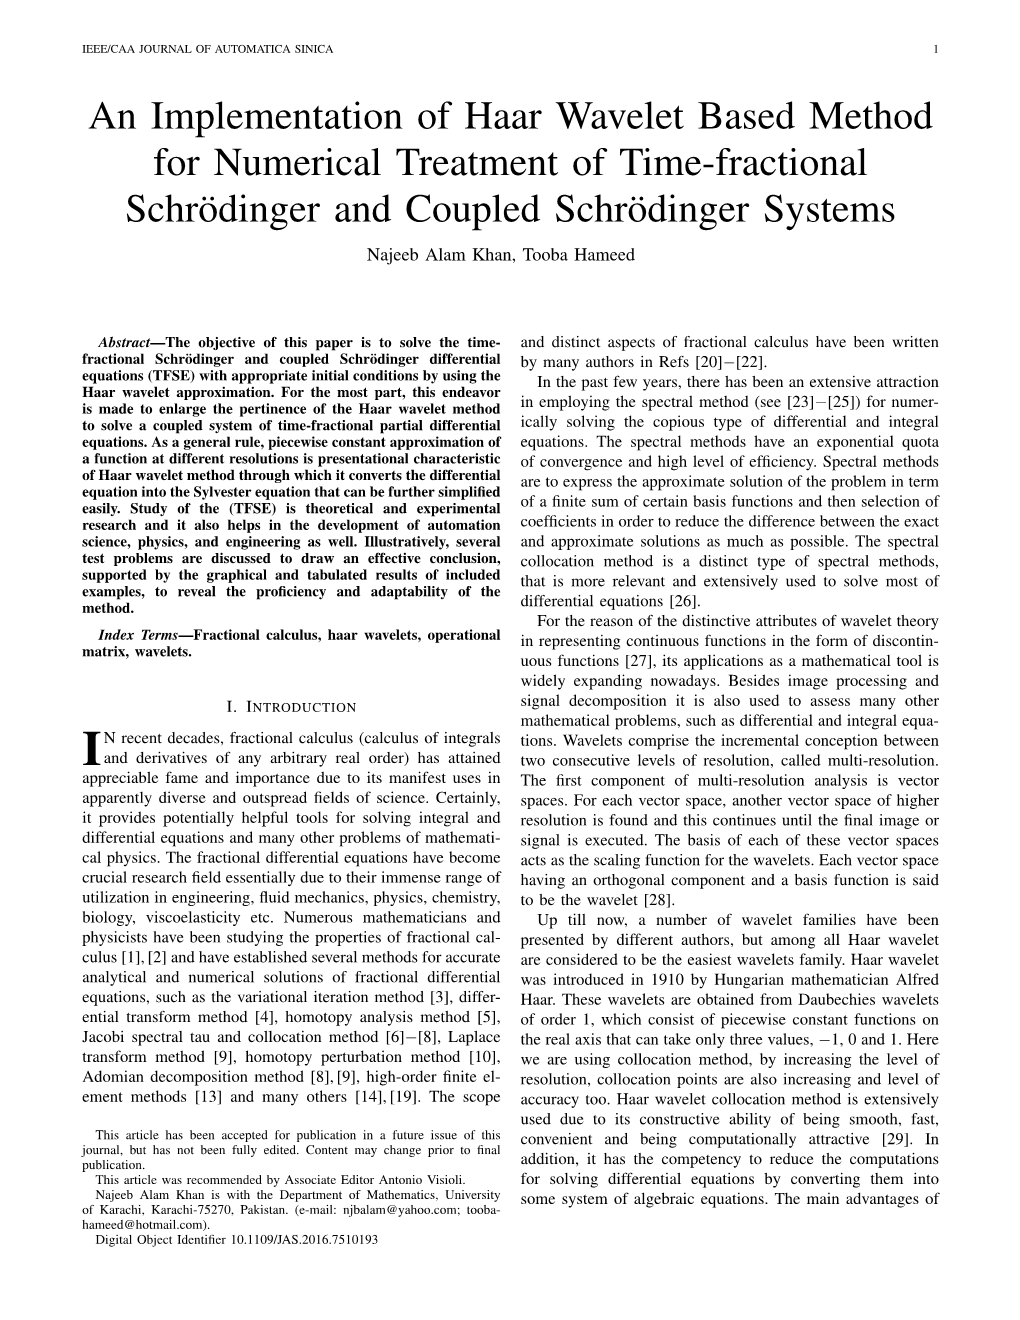 An Implementation of Haar Wavelet Based Method for Numerical Treatment of Time-Fractional Schrodinger¨ and Coupled Schrodinger¨ Systems Najeeb Alam Khan, Tooba Hameed